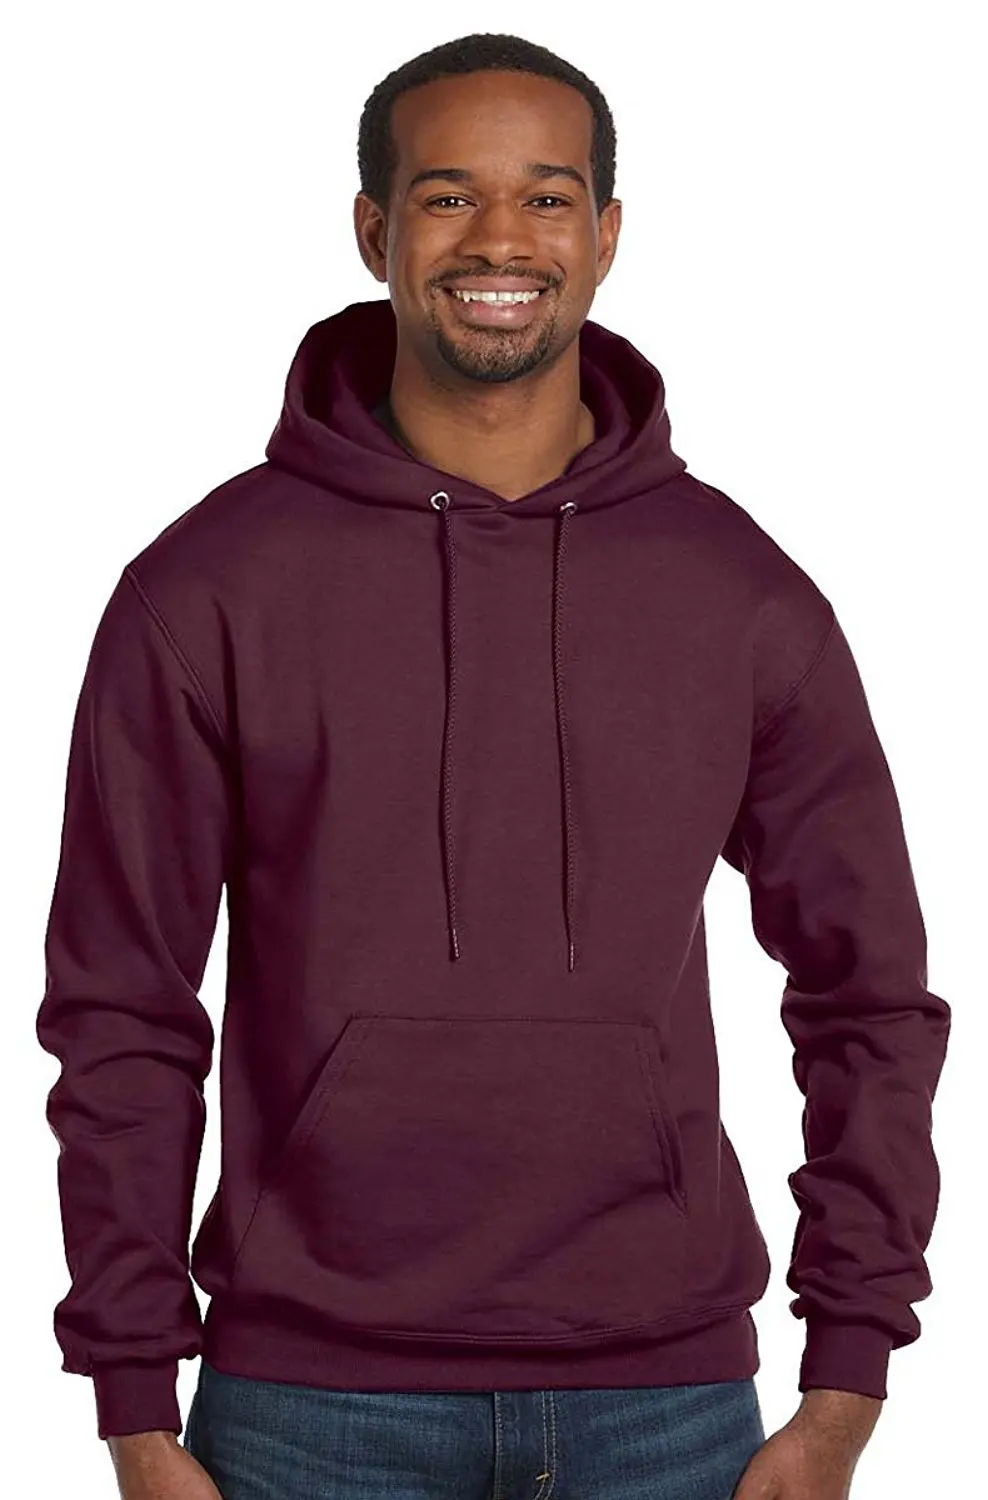 Cheap Champion Eco Hoodie, find Champion Eco Hoodie deals on line at www.paulmartinsmith.com